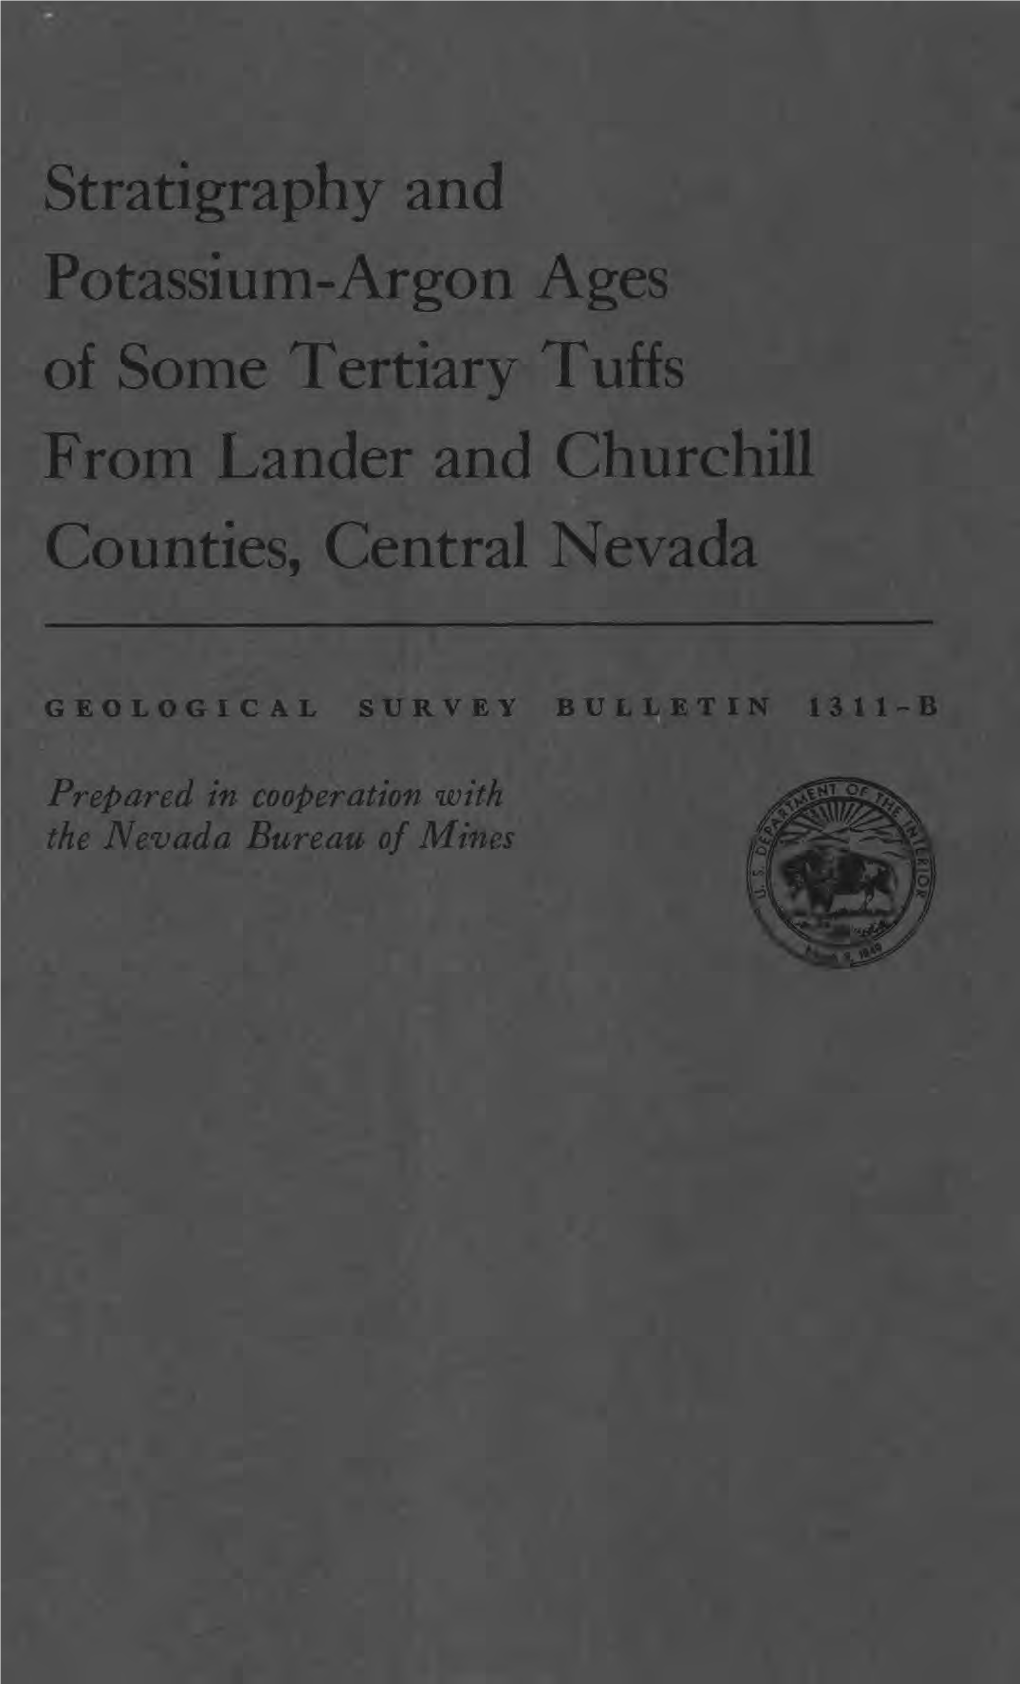 Stratigraphy and Potassium-Argon Ages of Some Tertiary Tuffs from Lander and Churchill Counties, Central Nevada